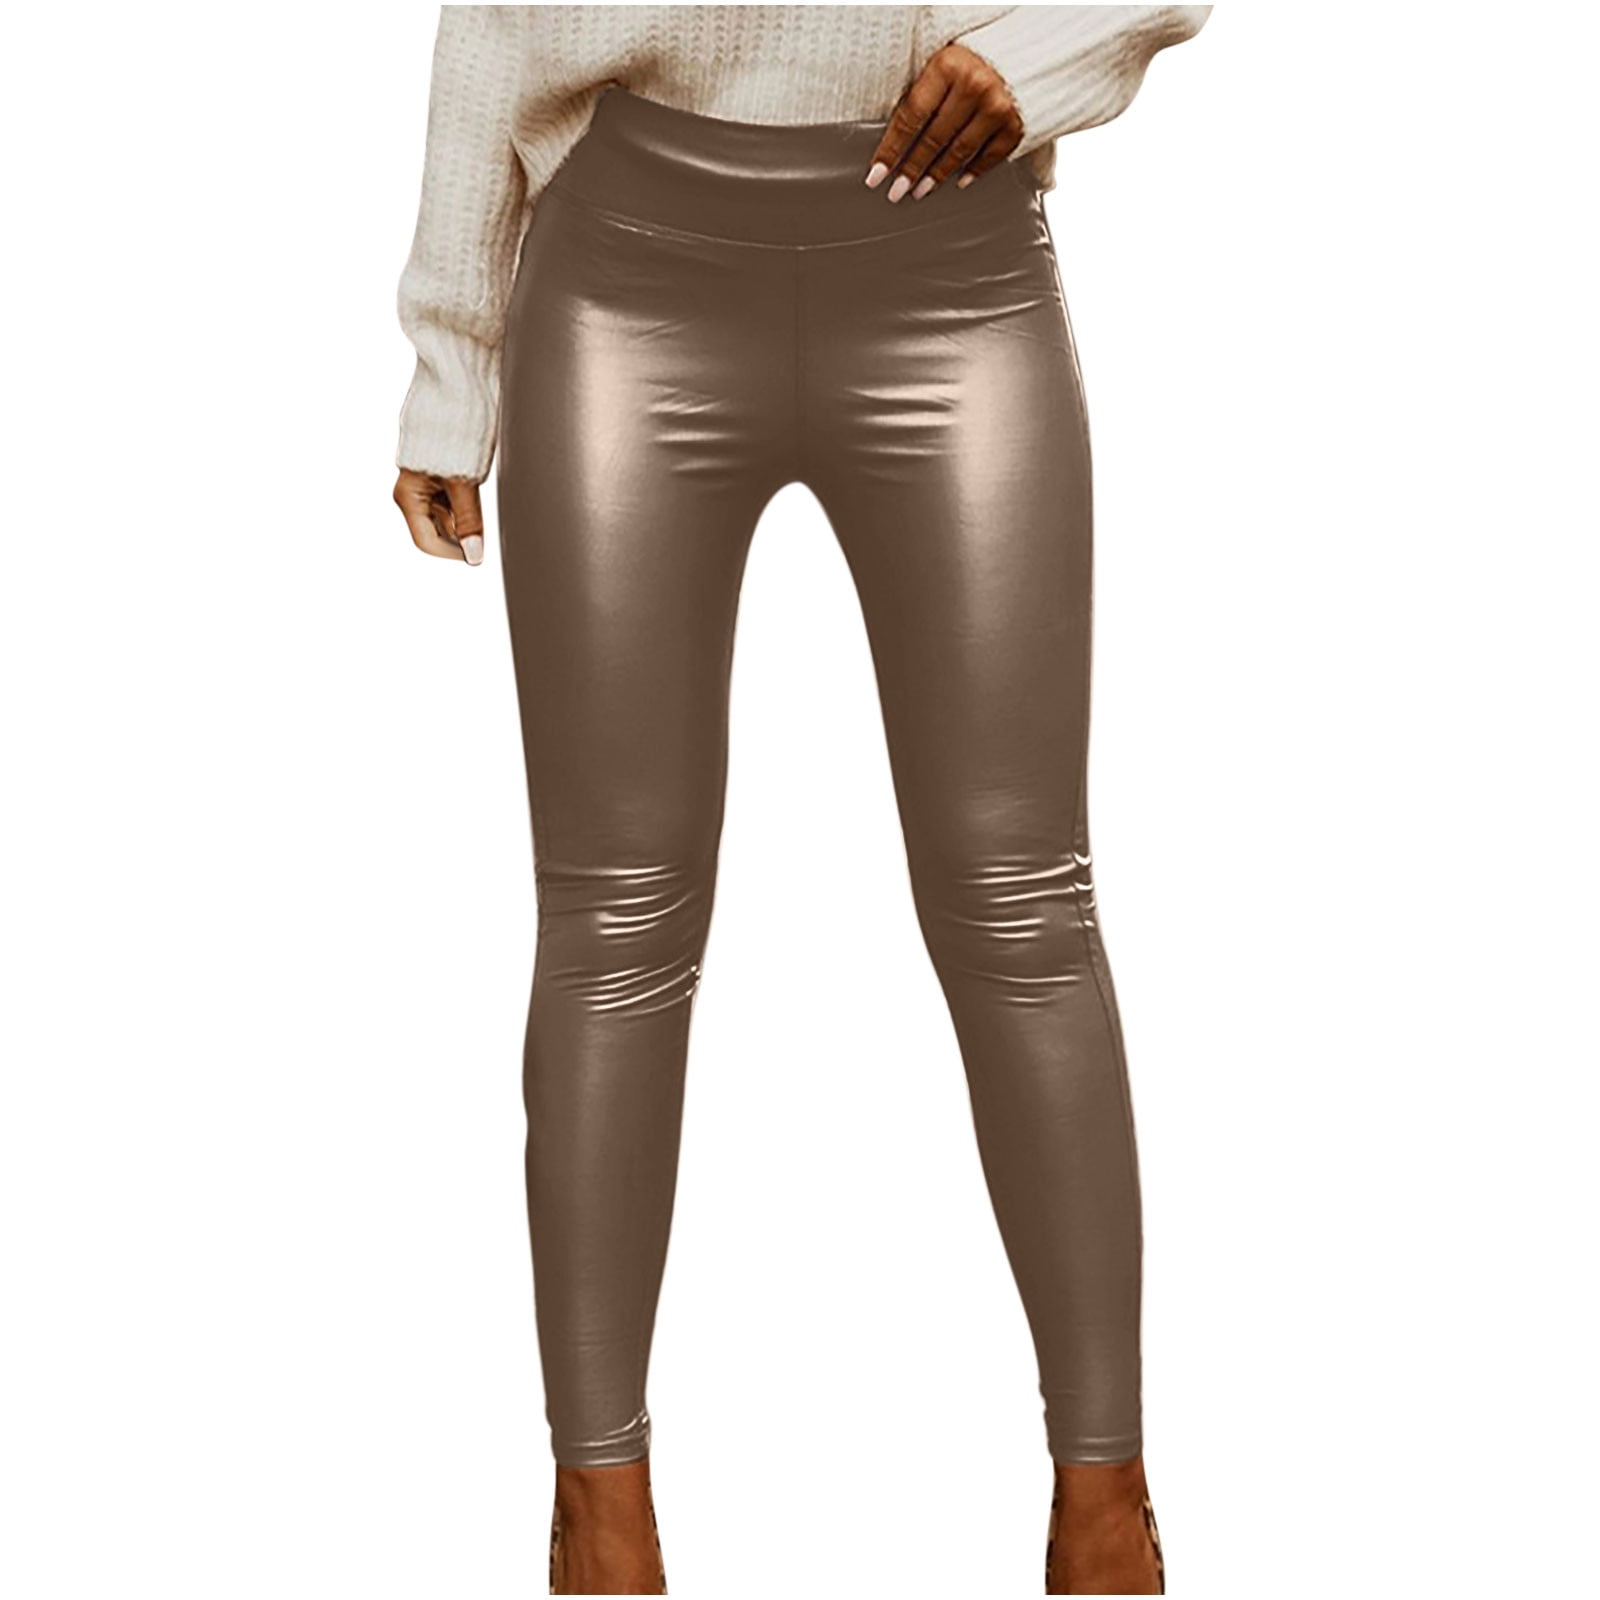 Faux Leather Leggings for Women Black Stretchy Ruchy PU Elastic High  Waisted Shiny Sexy Pleather Cropped Pants 